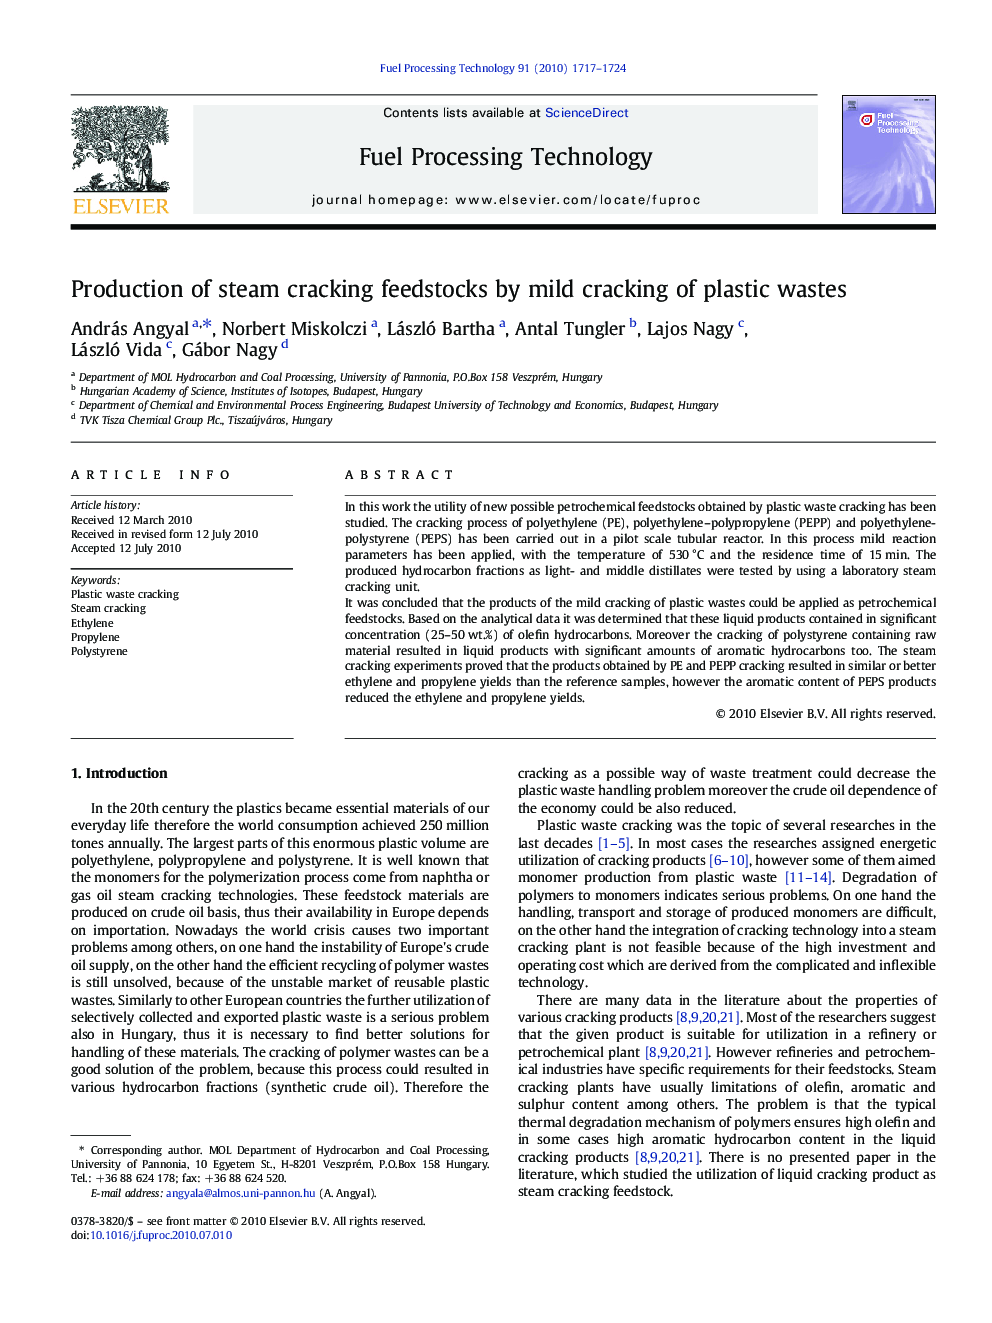 Production of steam cracking feedstocks by mild cracking of plastic wastes